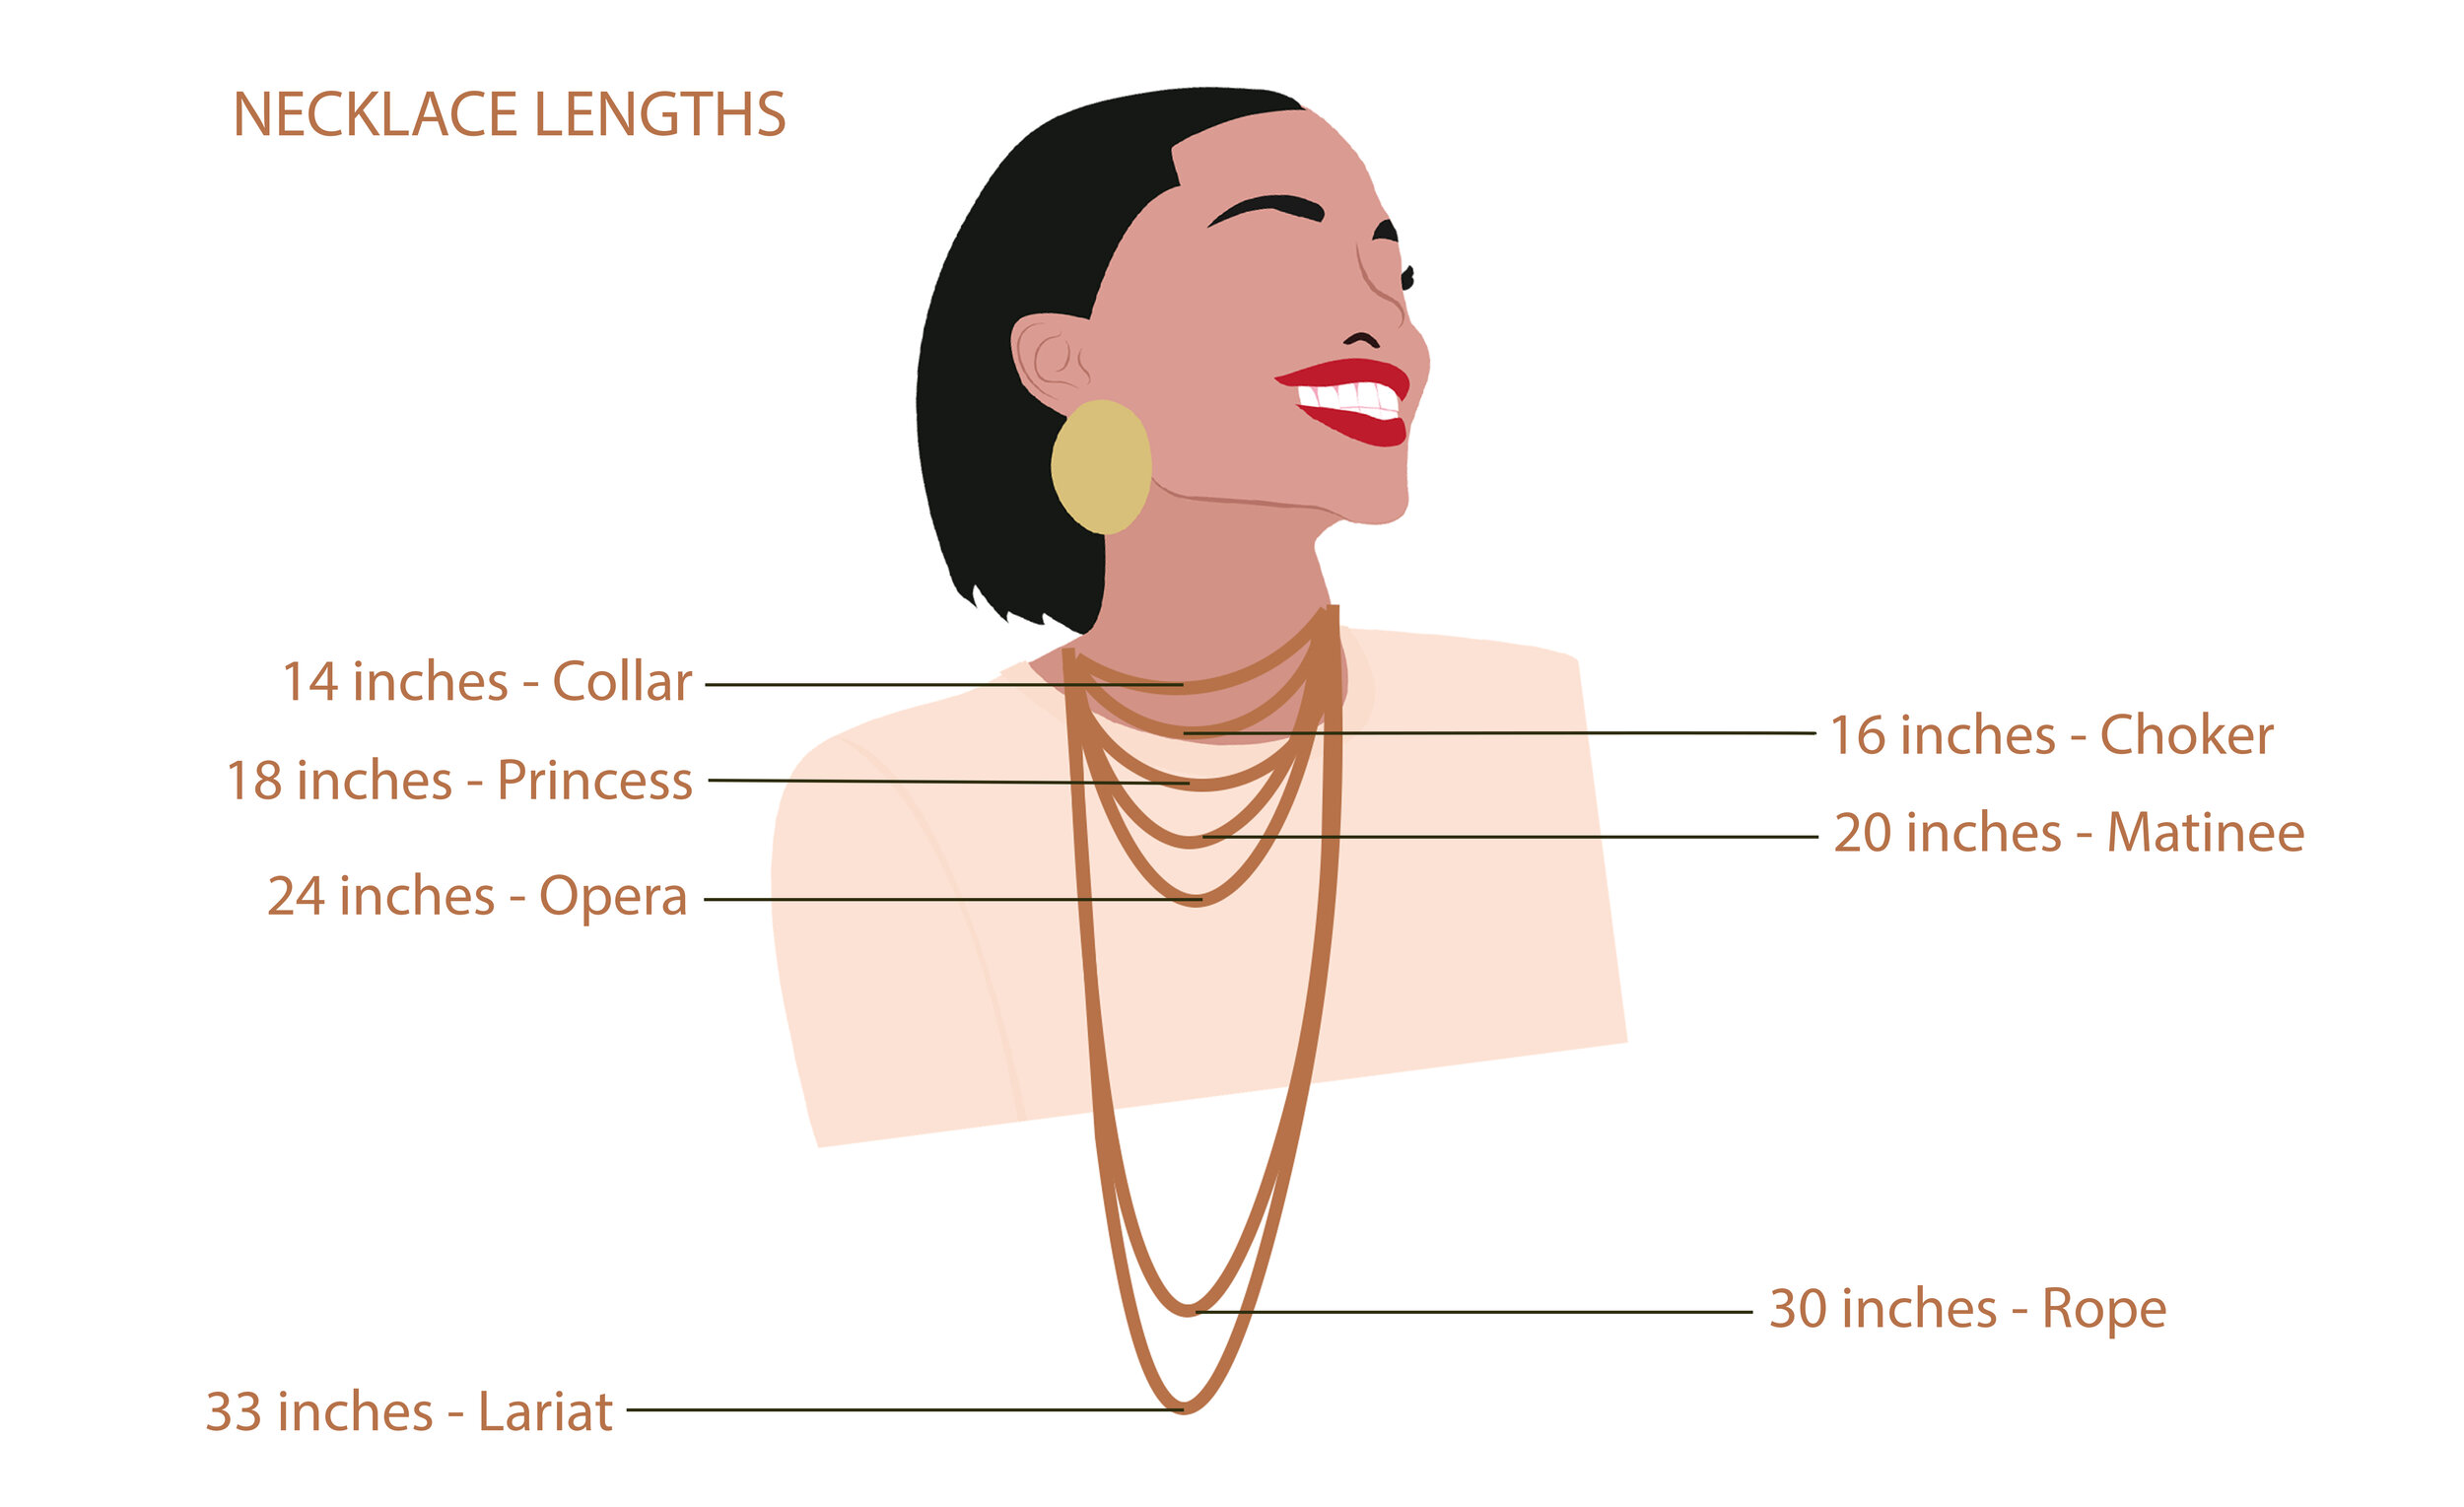 5 tips for choosing the perfect necklace length